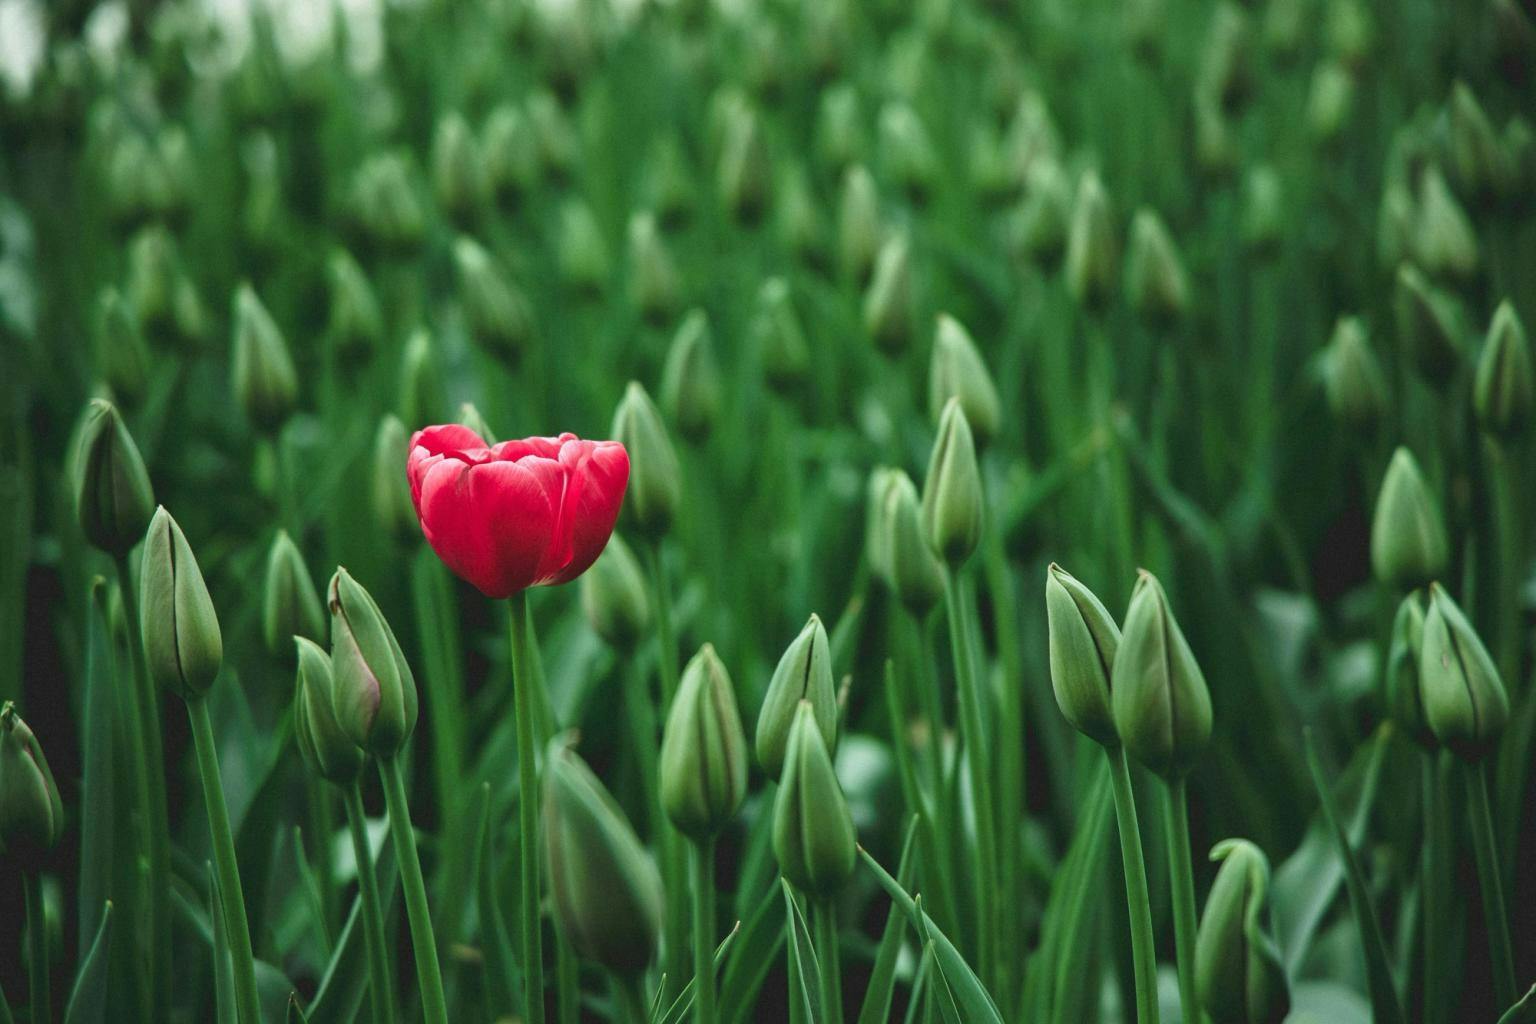 A red flower sits in a field of green buds yet to open